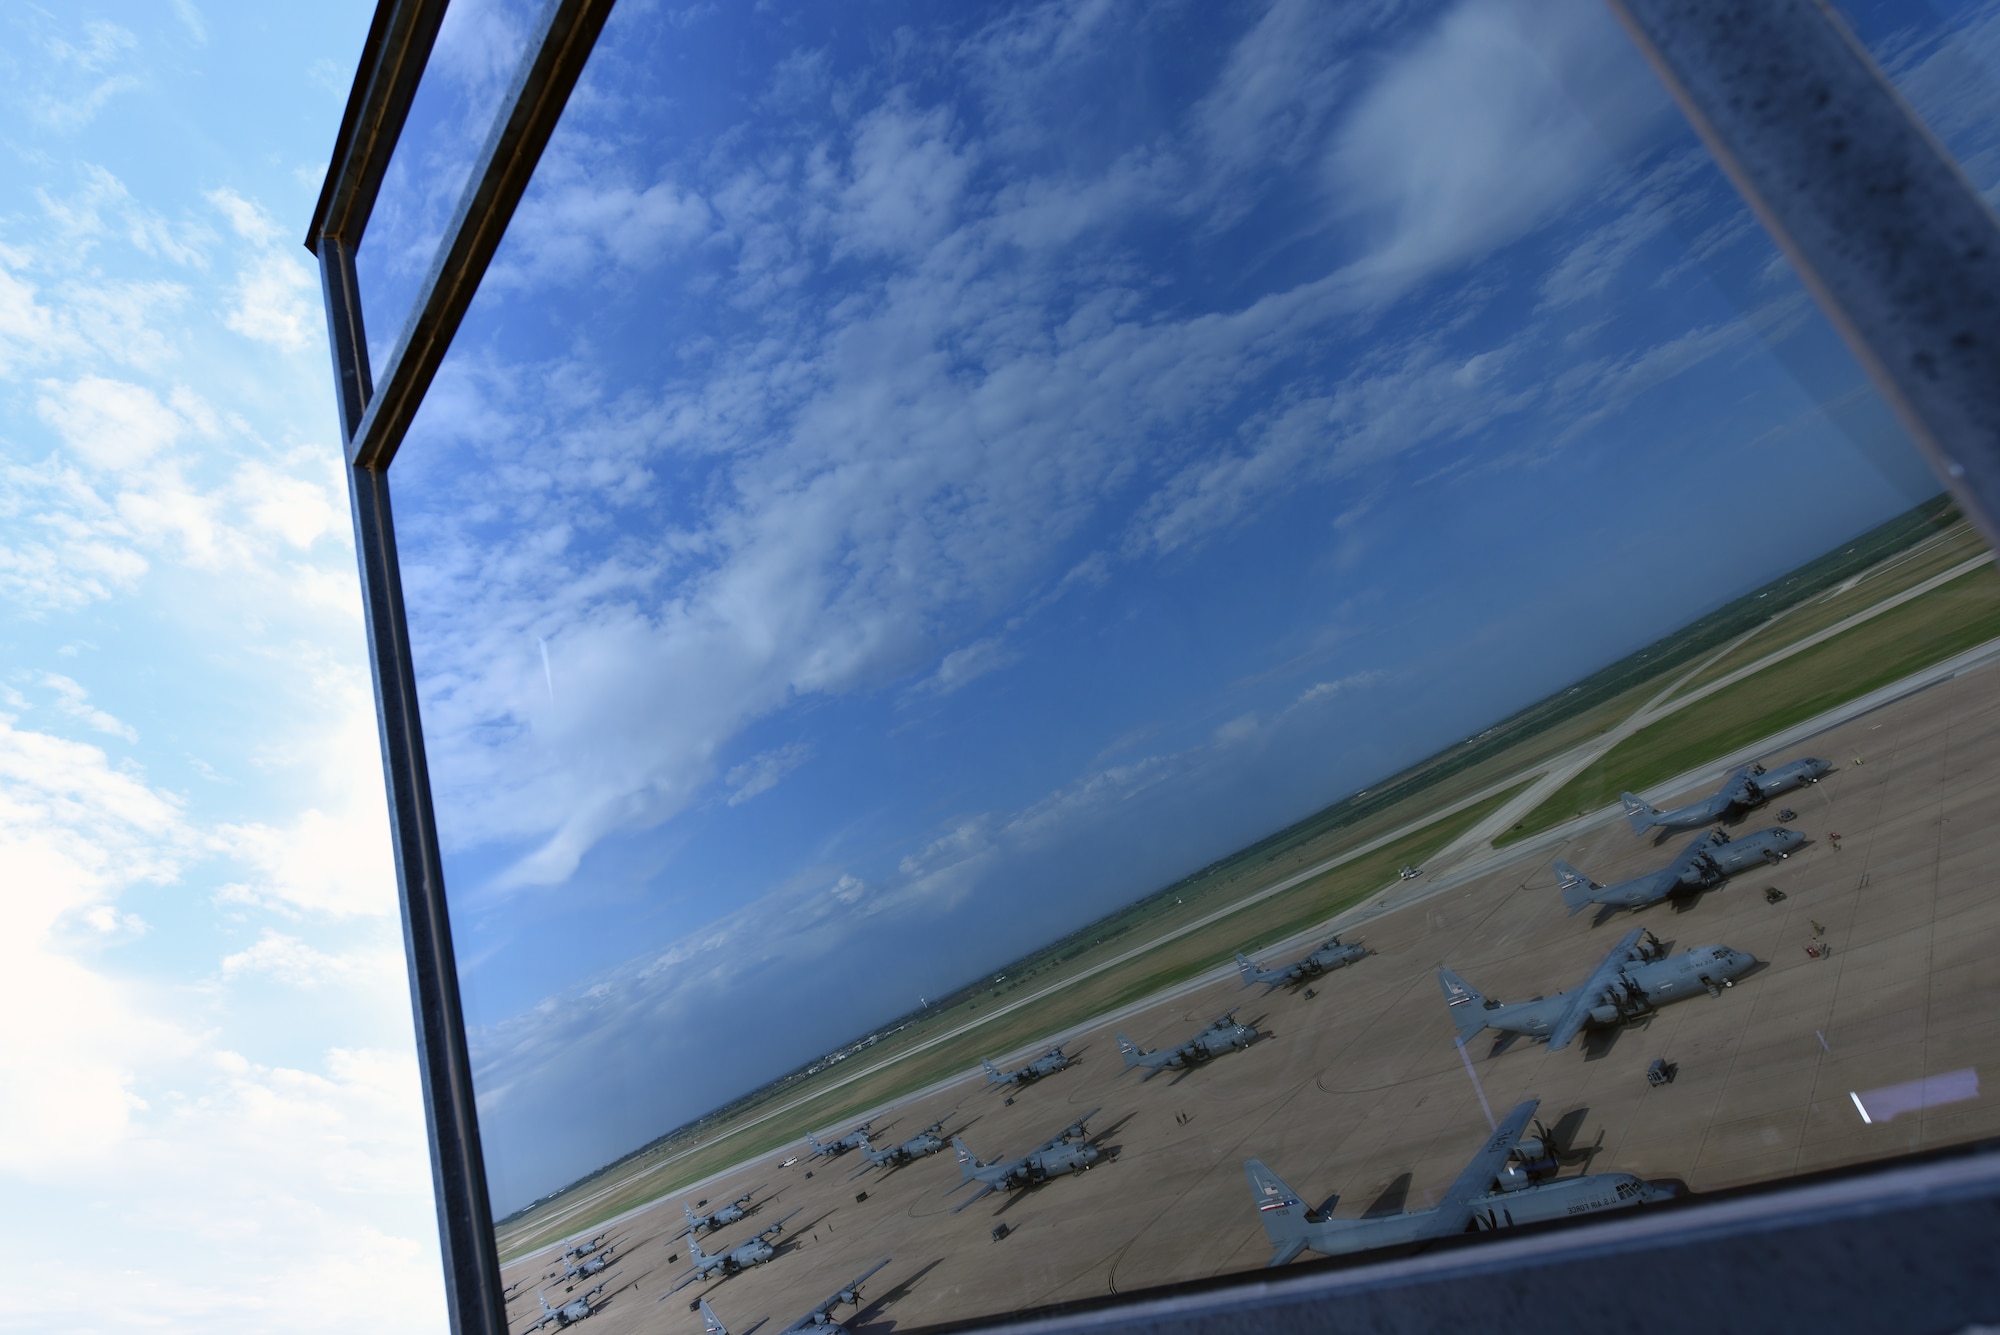 A view of C-130J Super Hercules aircraft belonging to the 317th Airlift Wing reflect in the window of the Air Traffic Control Tower at Dyess Air Force Base, July 14, 2020.